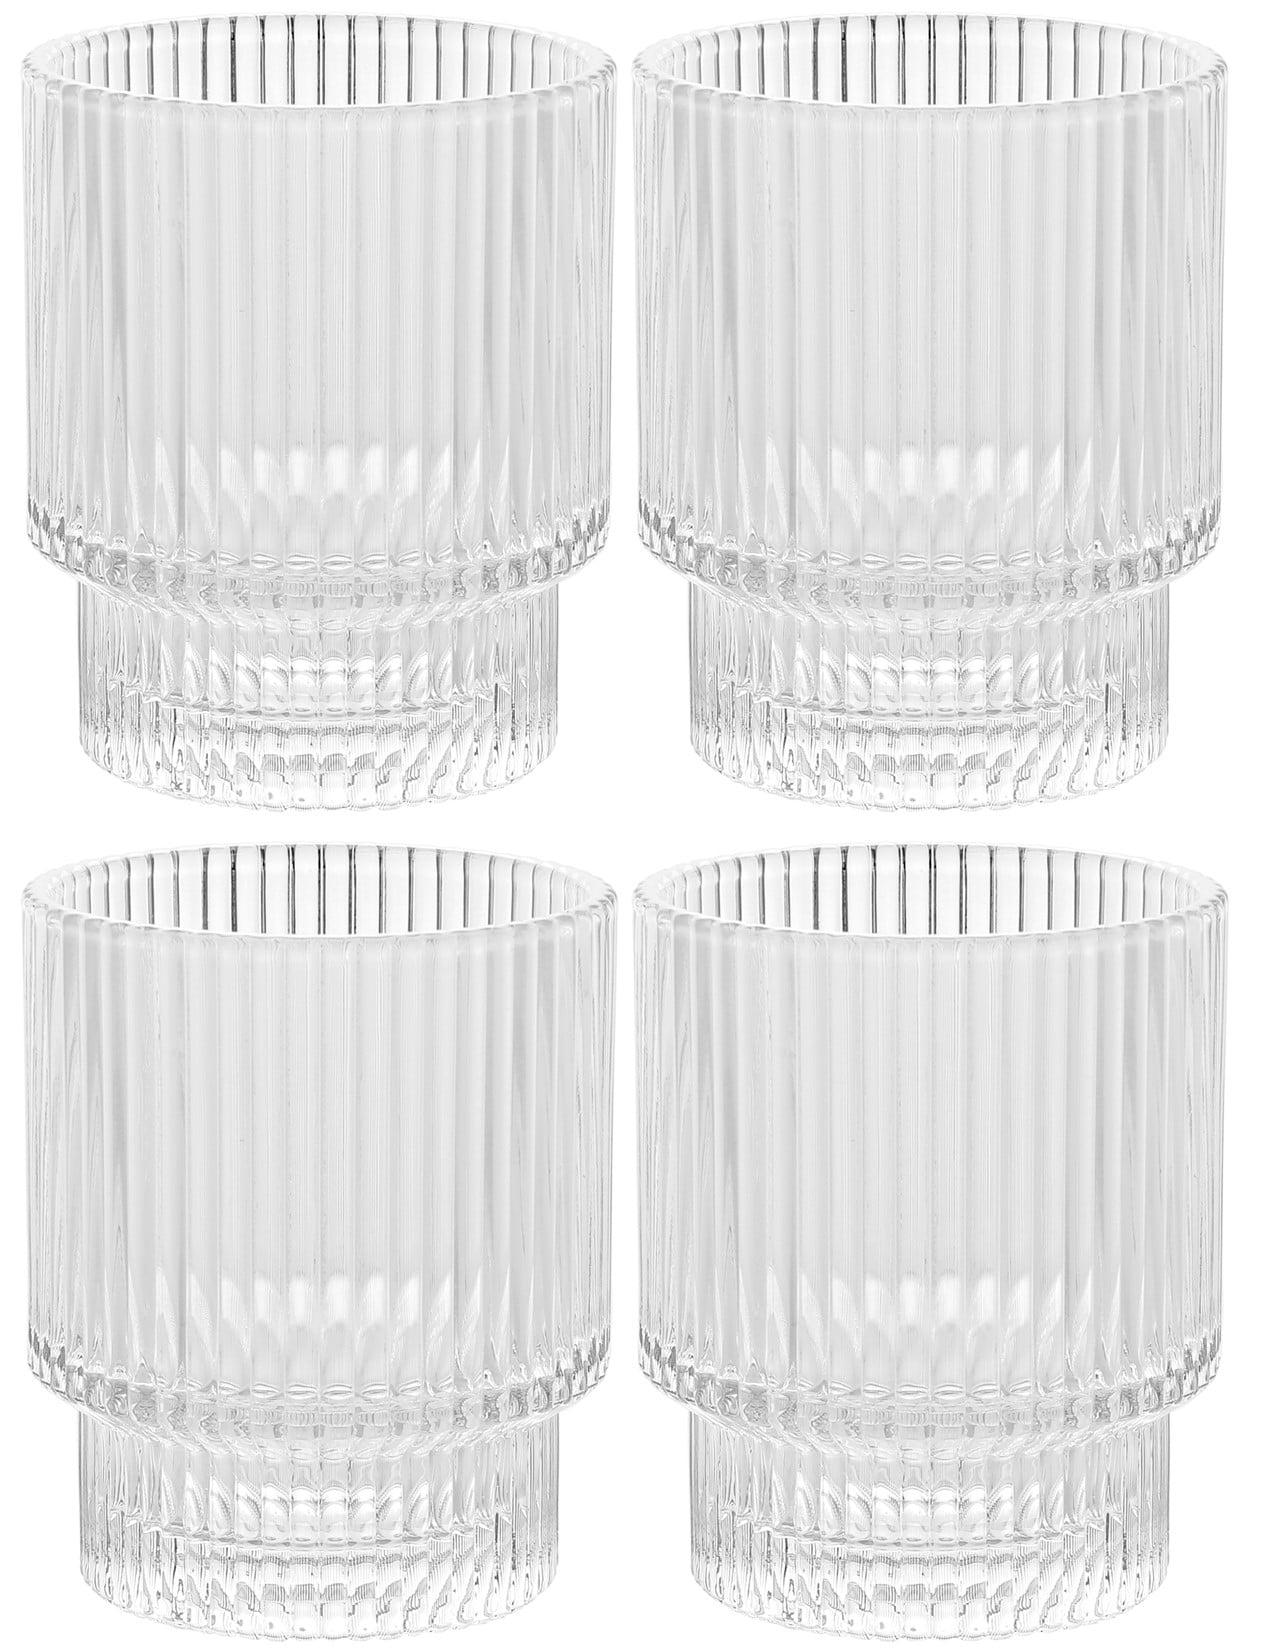 Vintage Art Deco Fluted Drinking Glasses - 9 oz Modern Kitchen Glassware  Set Old Fashion Tumbler Cups for Weddings, Cocktails, Bar Ribbed Lowball  Glass Cup for Water, Gin, Whiskey- Set of 4